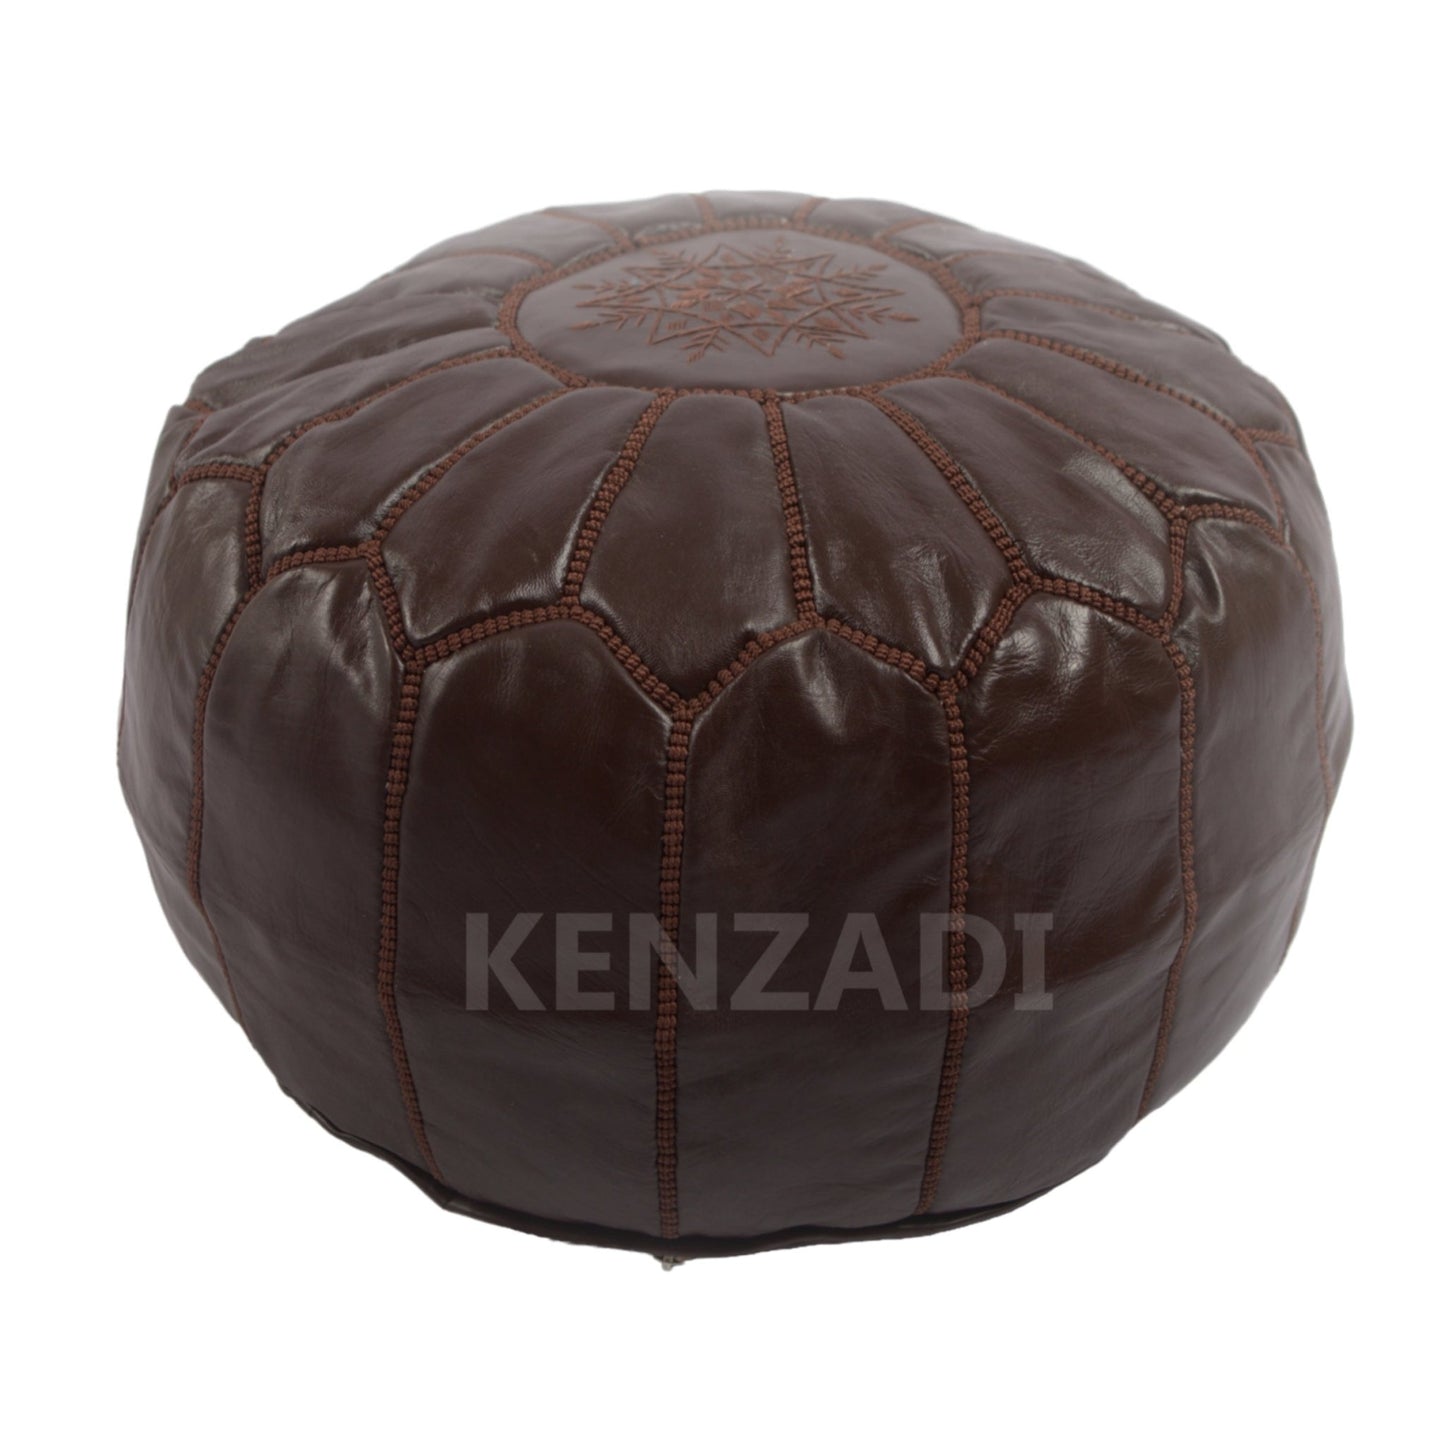 Moroccan leather Pouf, round Pouf, berber Pouf, Dark Brown Pouf with Brown embroidery by Kenzadi - Handmade by My Poufs